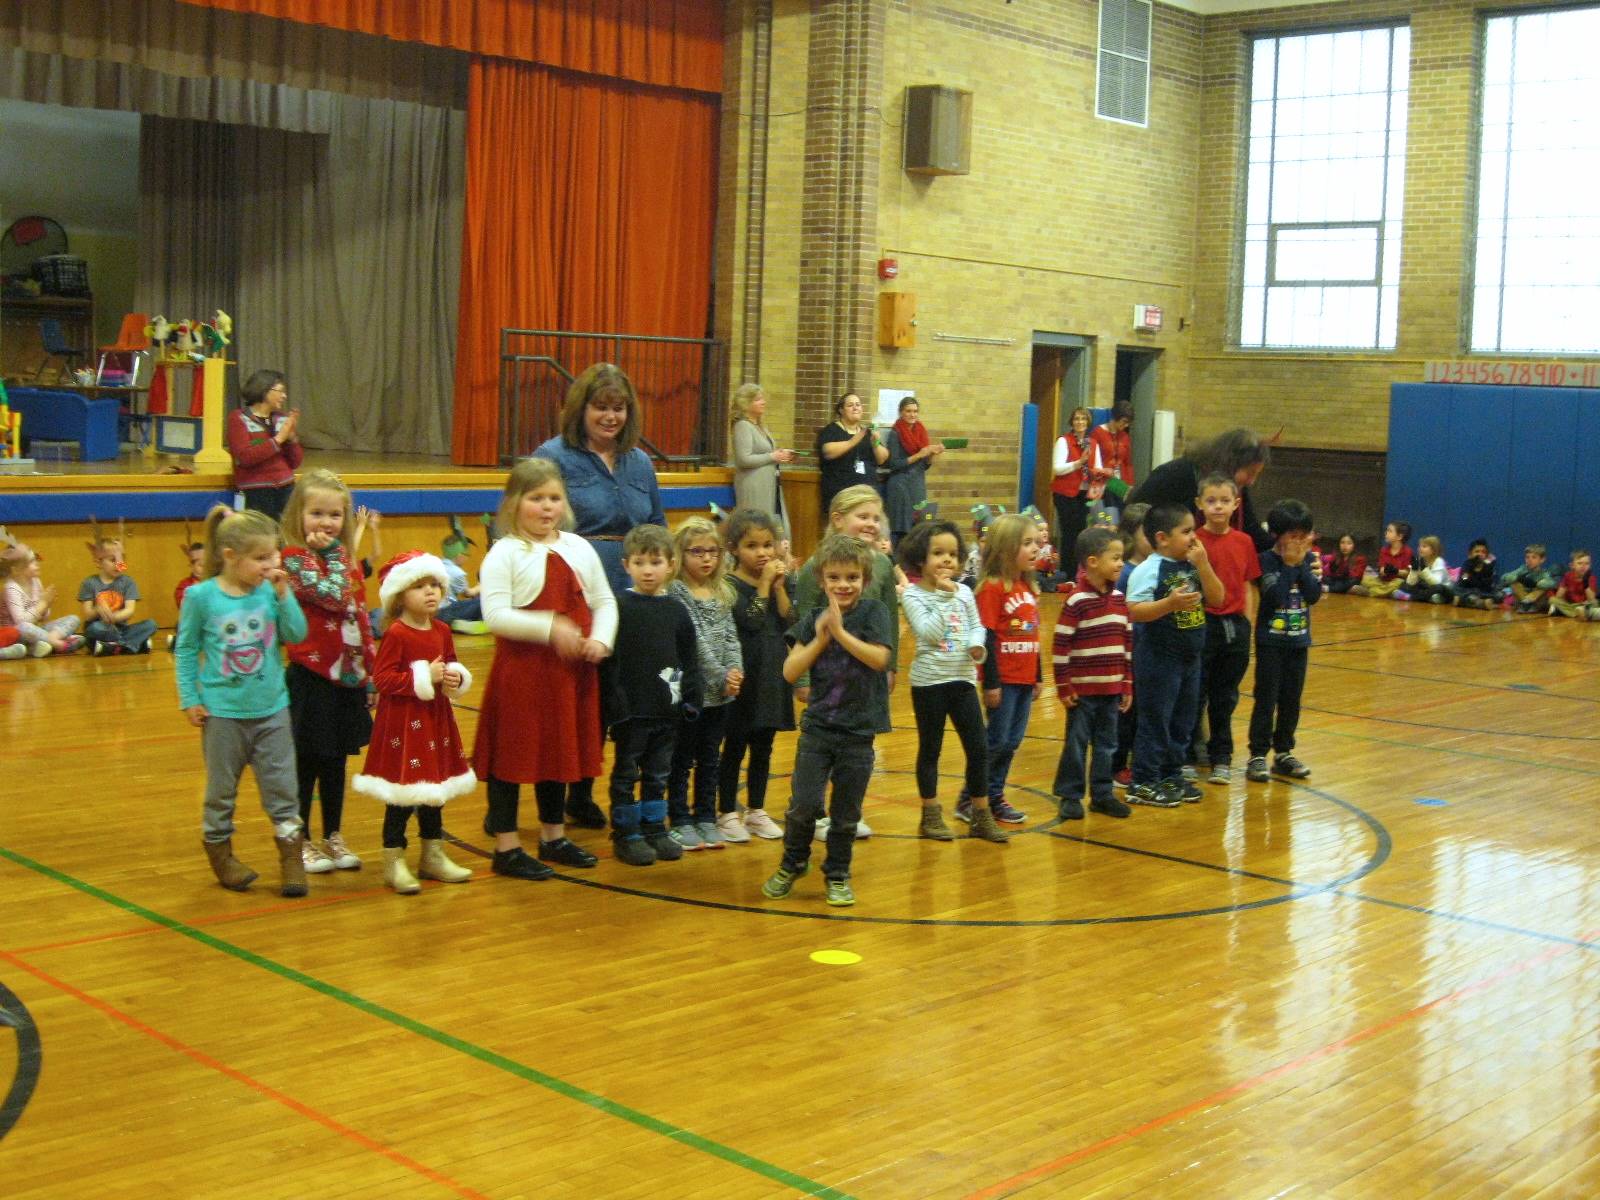 Students sing at assembly.